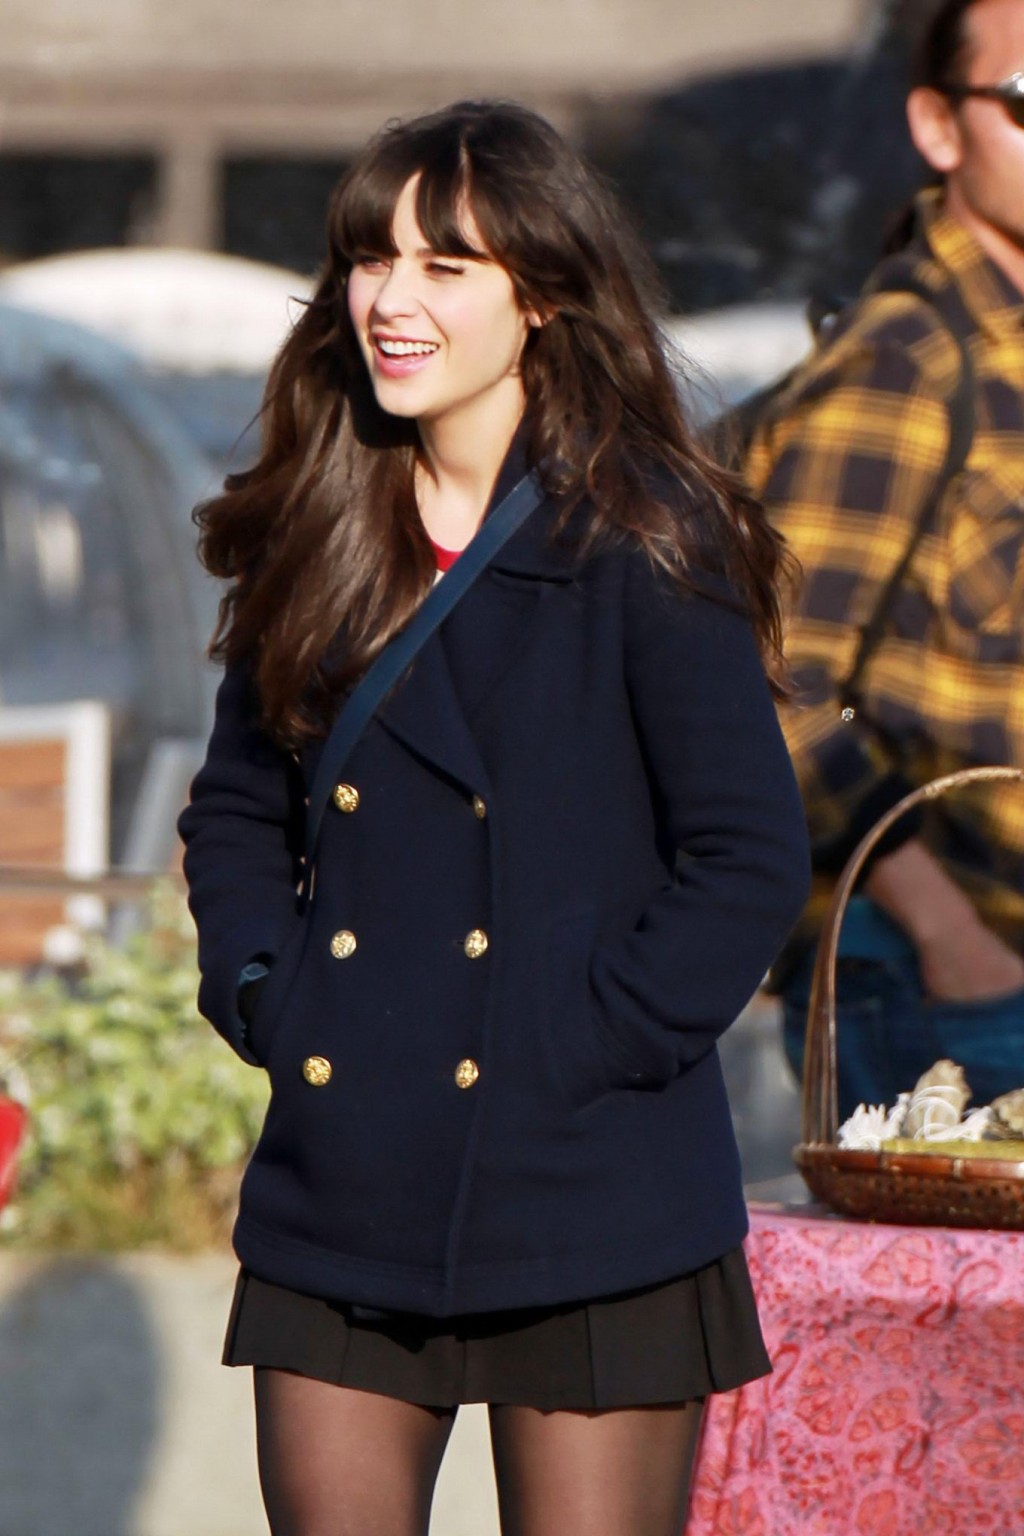 Zooey Deschanel upskirt while cycling in mini skirt  pantyhose on the 'New Girl' #75278343